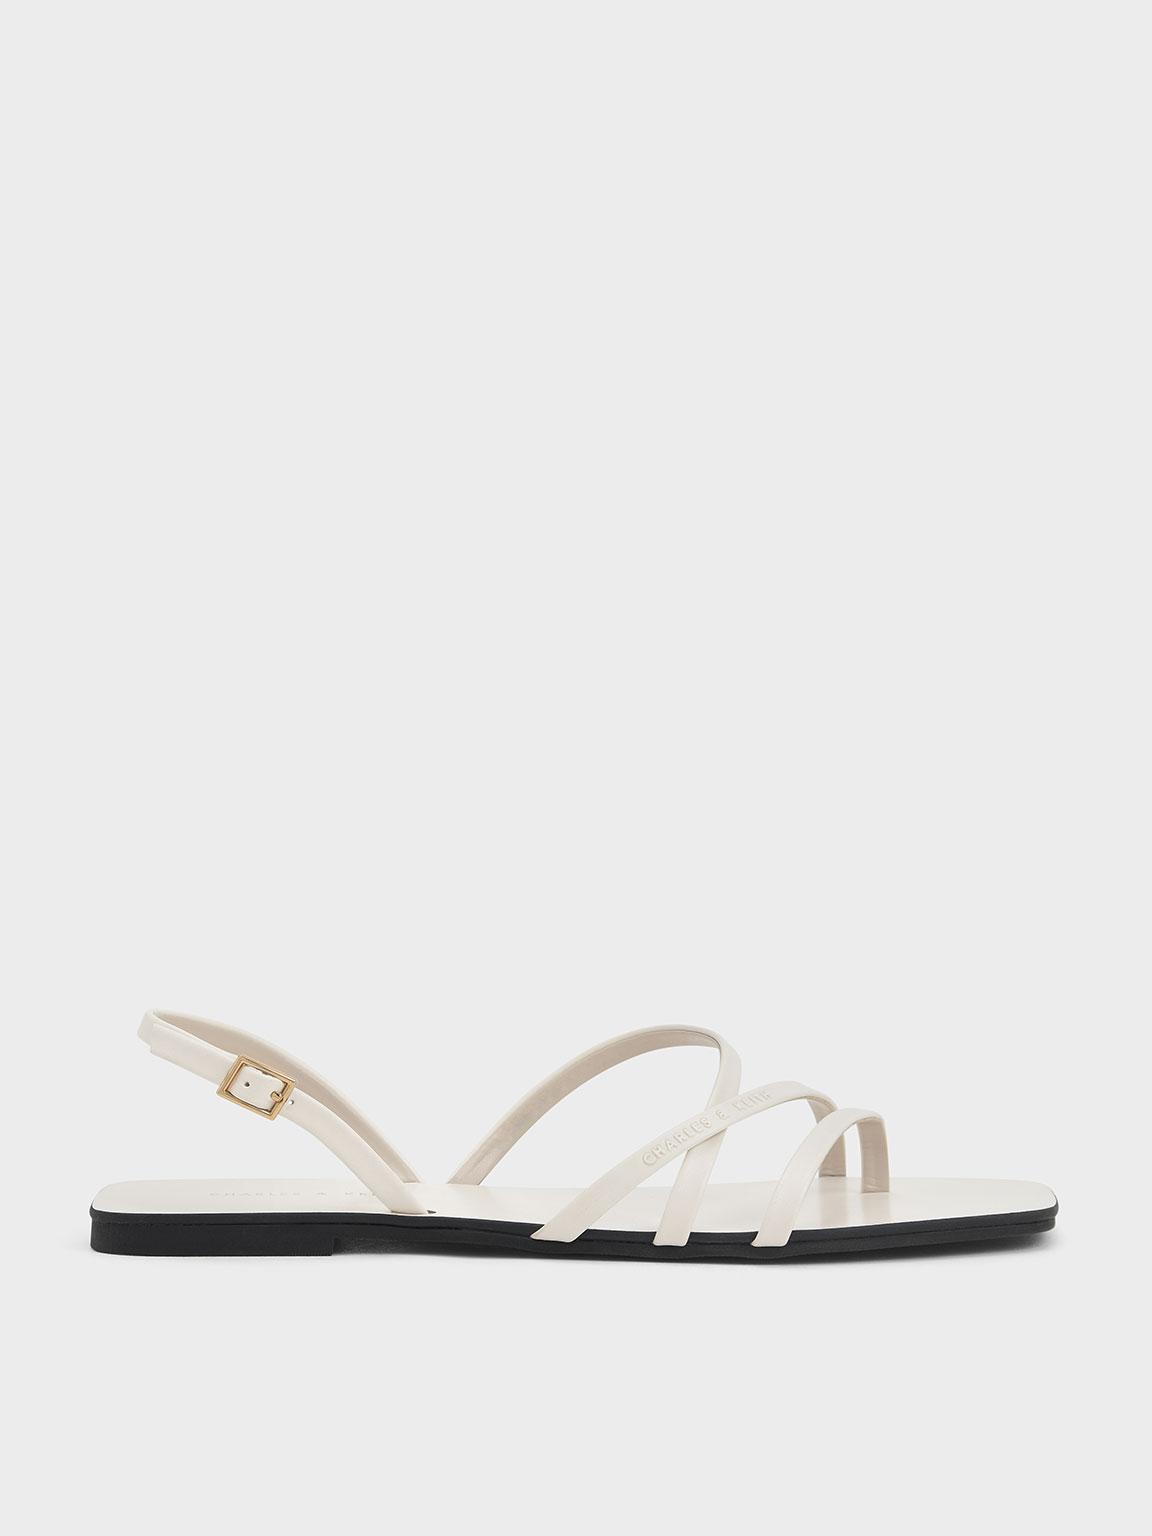 Charles & Keith Strappy Square-toe Slingback Sandals in Natural | Lyst UK